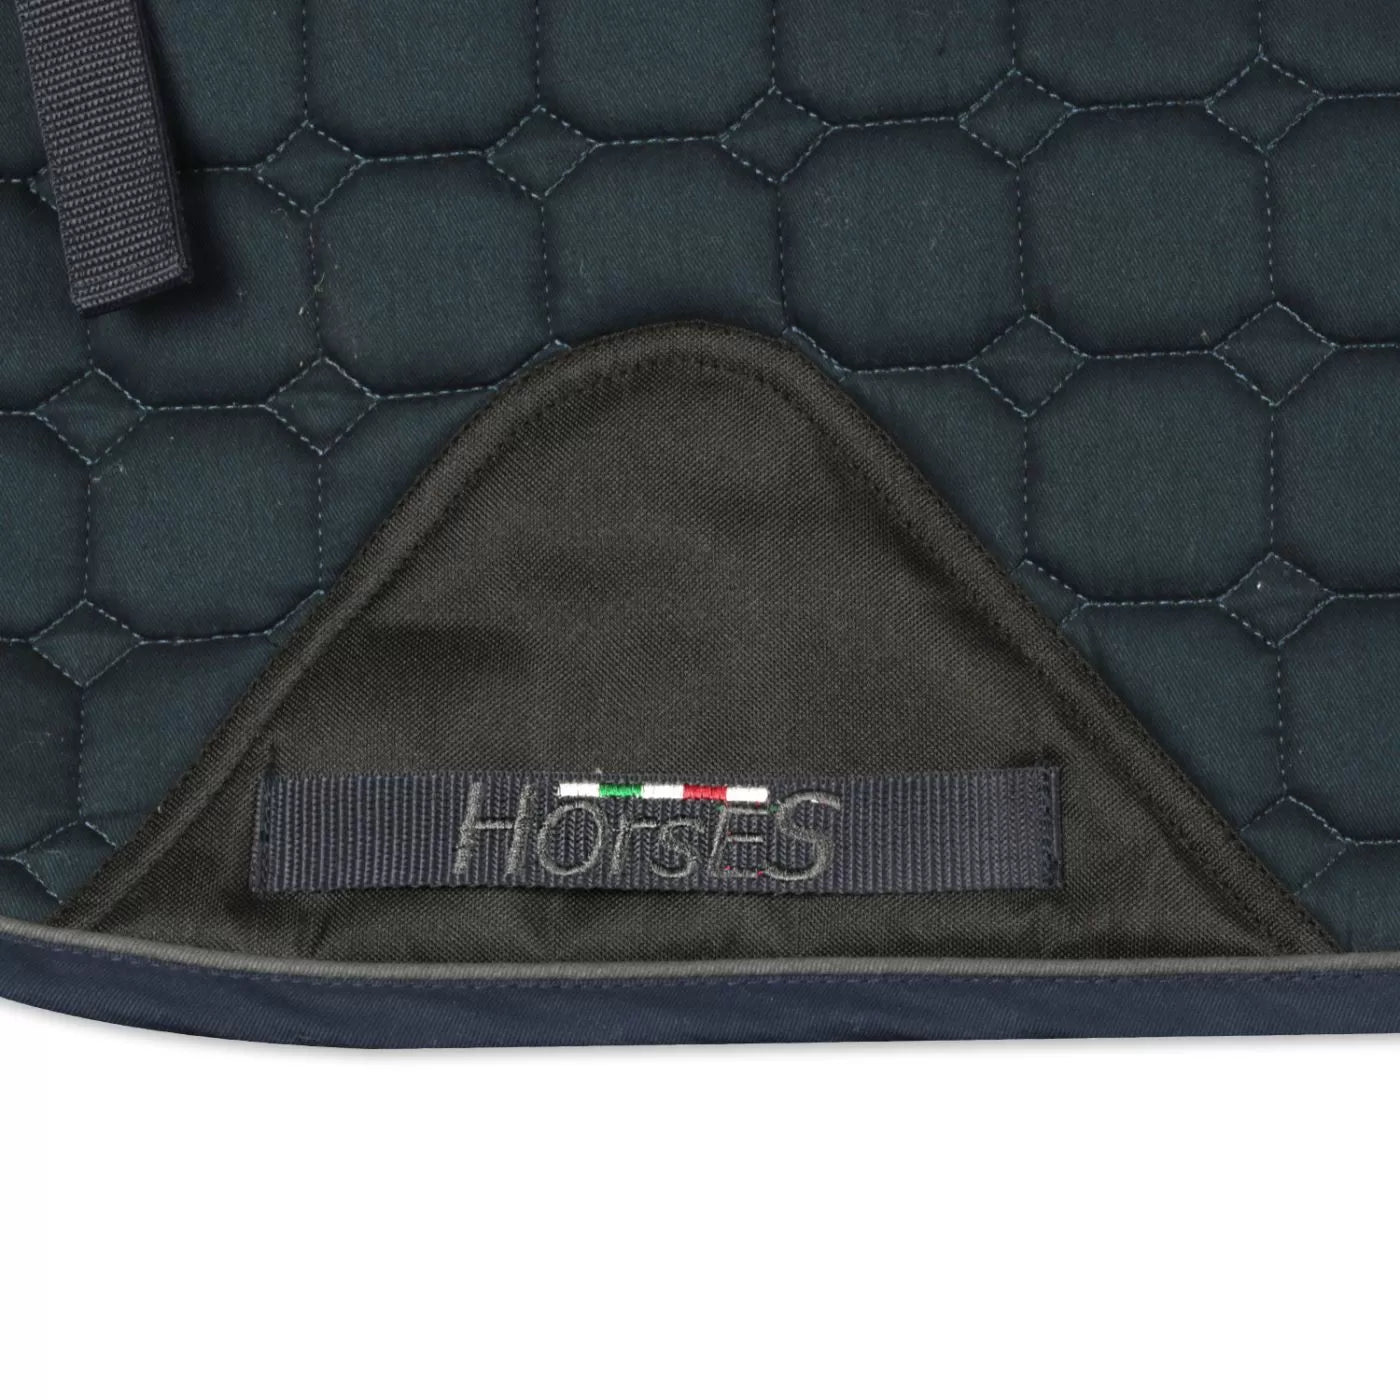 Sottosella Horses Crown Stripes Full